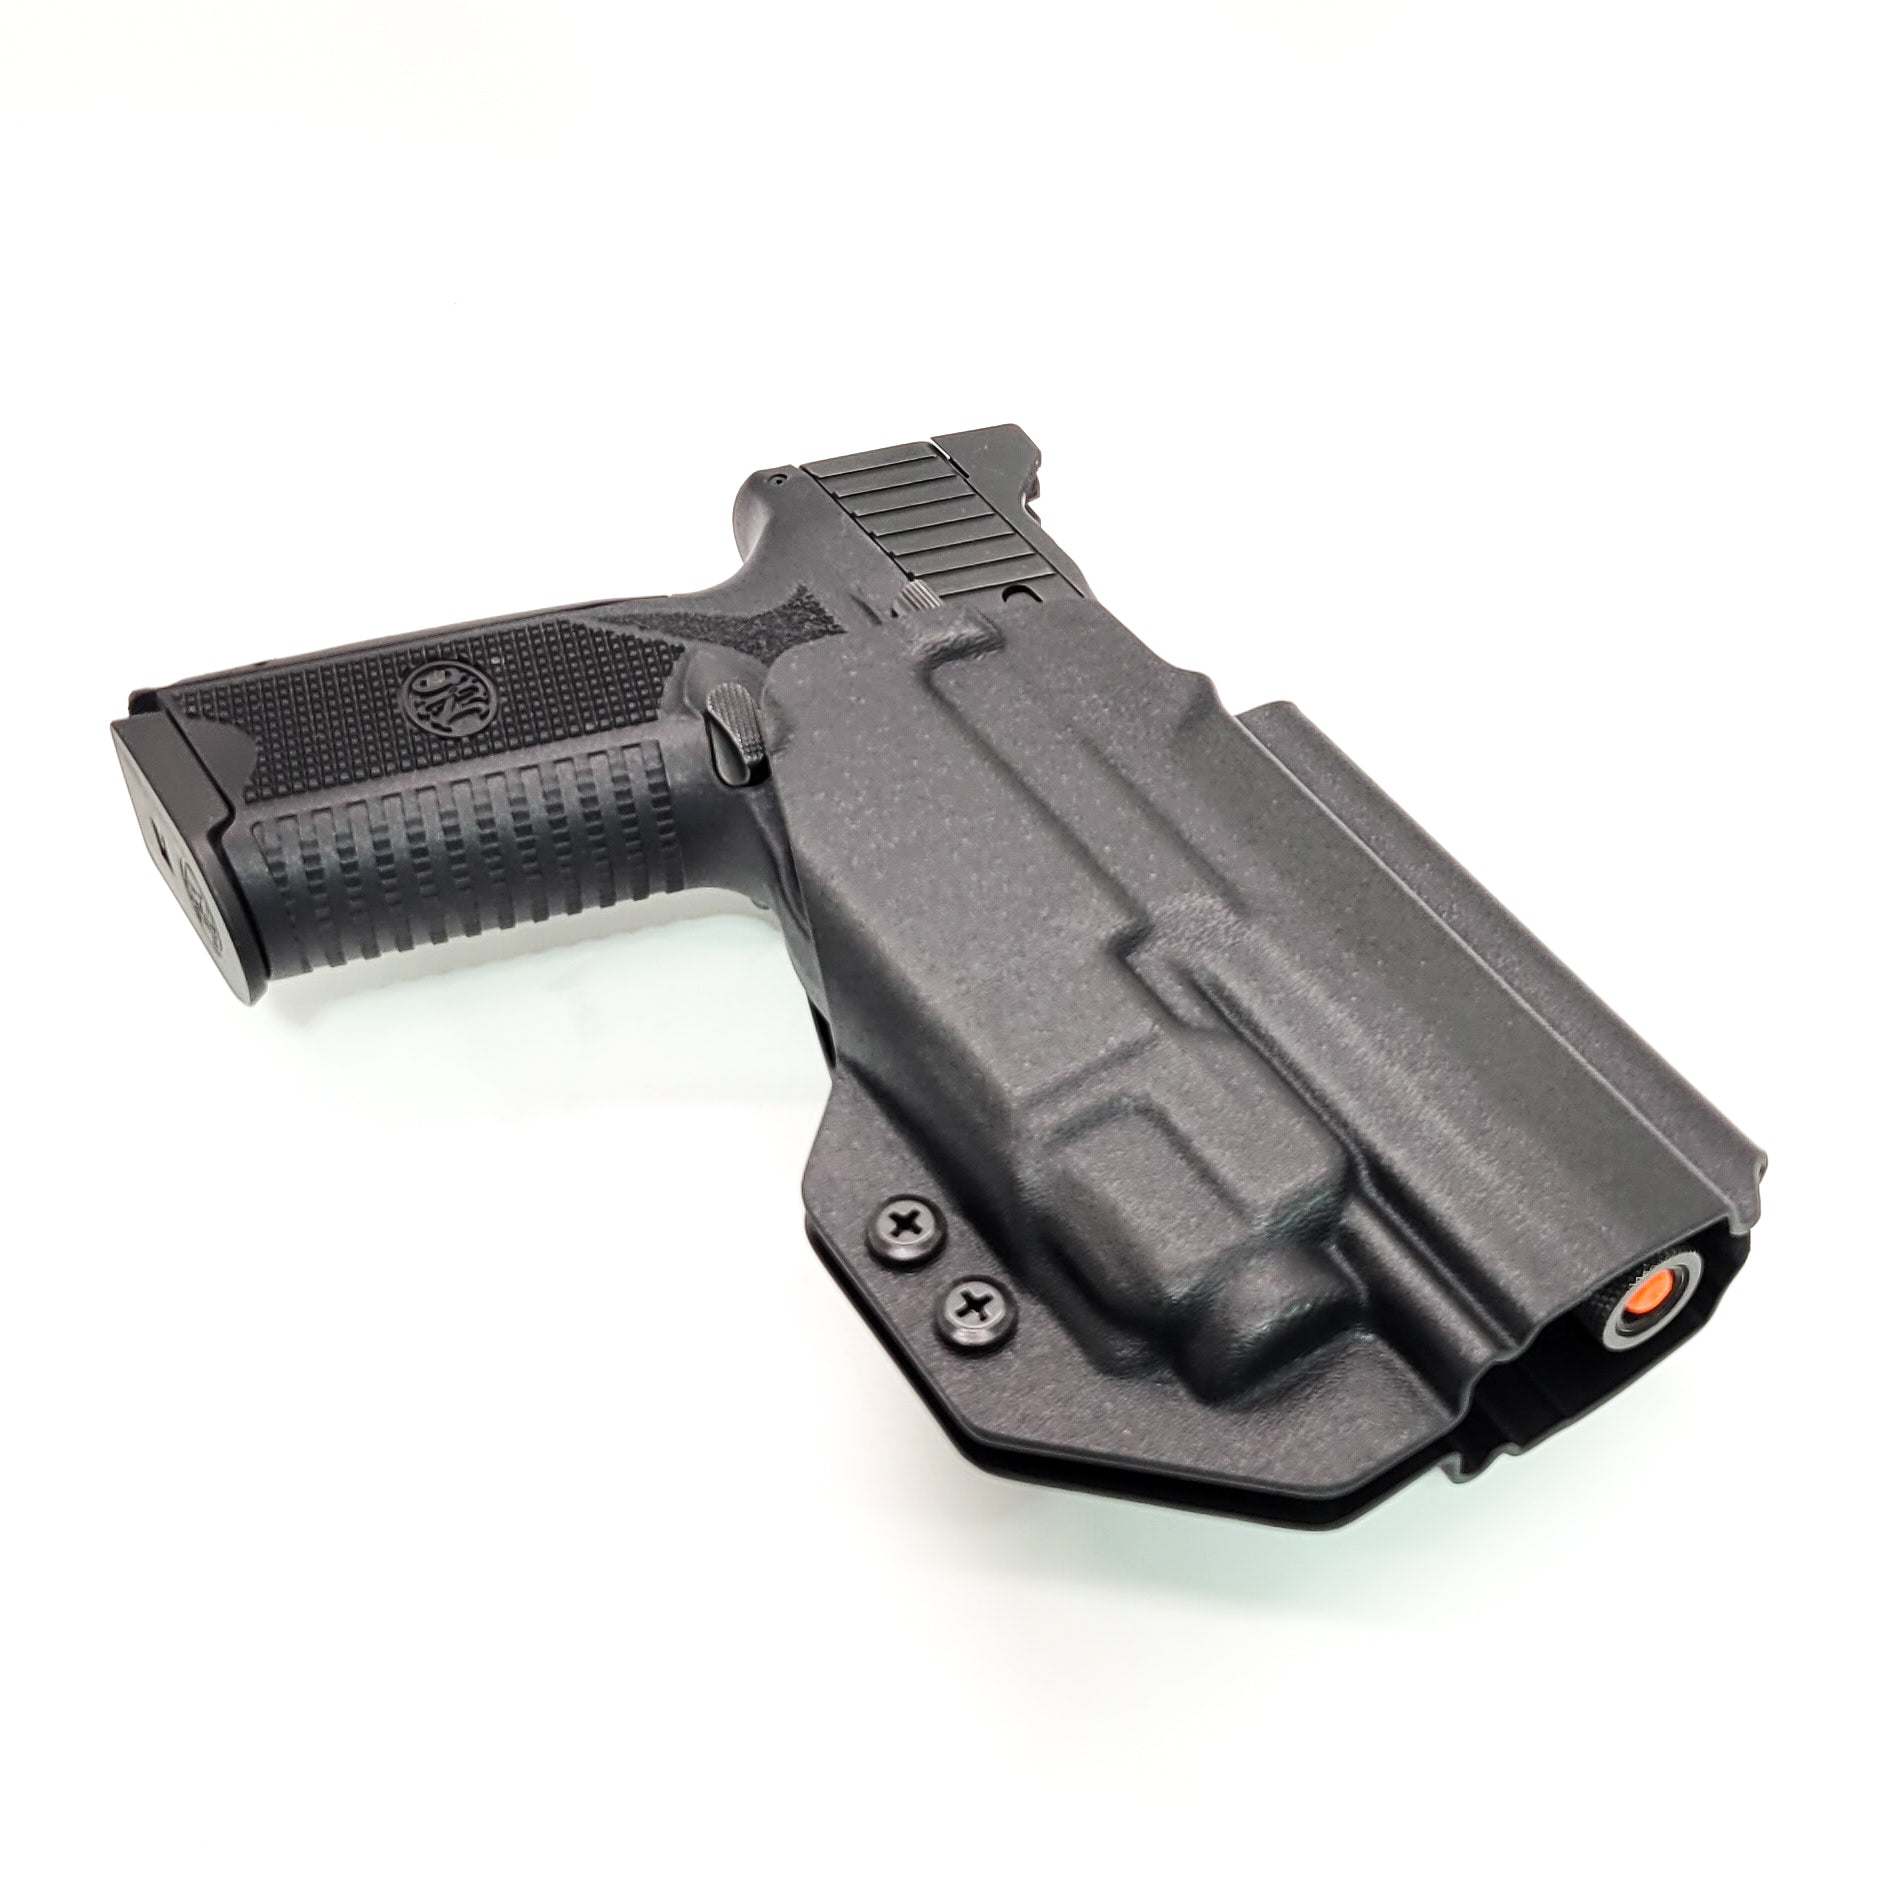 Outside Waistband OWB Taco Style Kydex Holster for the FN 509 compact, 509 or 509 Tactical with the Streamlight TLR-8 or TLR-8A. Open Muzzle, adjustable retention, cleared for suppressor height sights up to 3/8", full sweat guard, cut for red dot sights and optics. Made in the USA. 4BROS Holster TLR8 TLR 8A TLR 8 